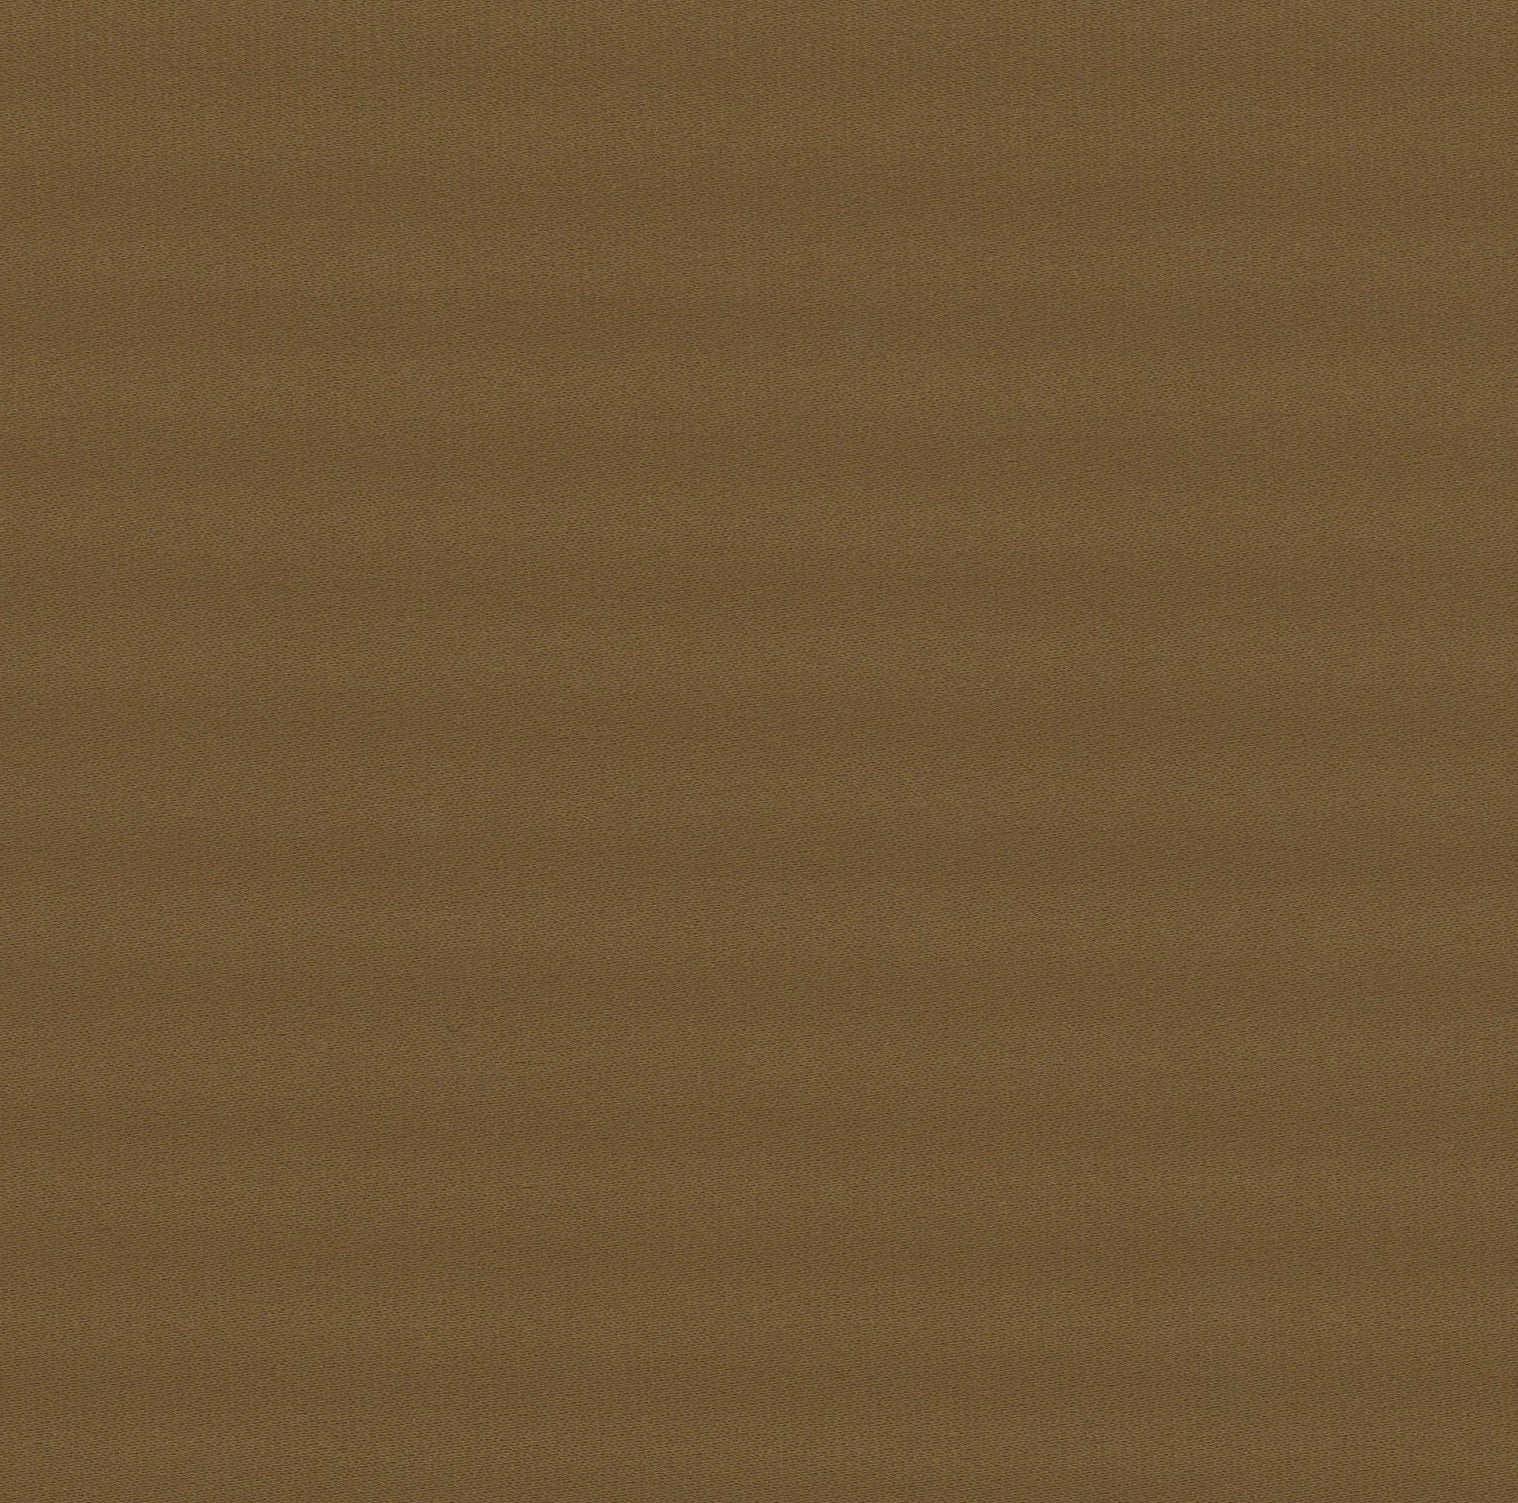 36033-08 Brown Polyester Plain Dyed 233g/yd 56" brown plain dyed polyester woven Solid Color - knit fabric - woven fabric - fabric company - fabric wholesale - fabric b2b - fabric factory - high quality fabric - hong kong fabric - fabric hk - acetate fabric - cotton fabric - linen fabric - metallic fabric - nylon fabric - polyester fabric - spandex fabric - chun wing hing - cwh hk - fabric worldwide ship - 針織布 - 梳織布 - 布料公司- 布料批發 - 香港布料 - 秦榮興